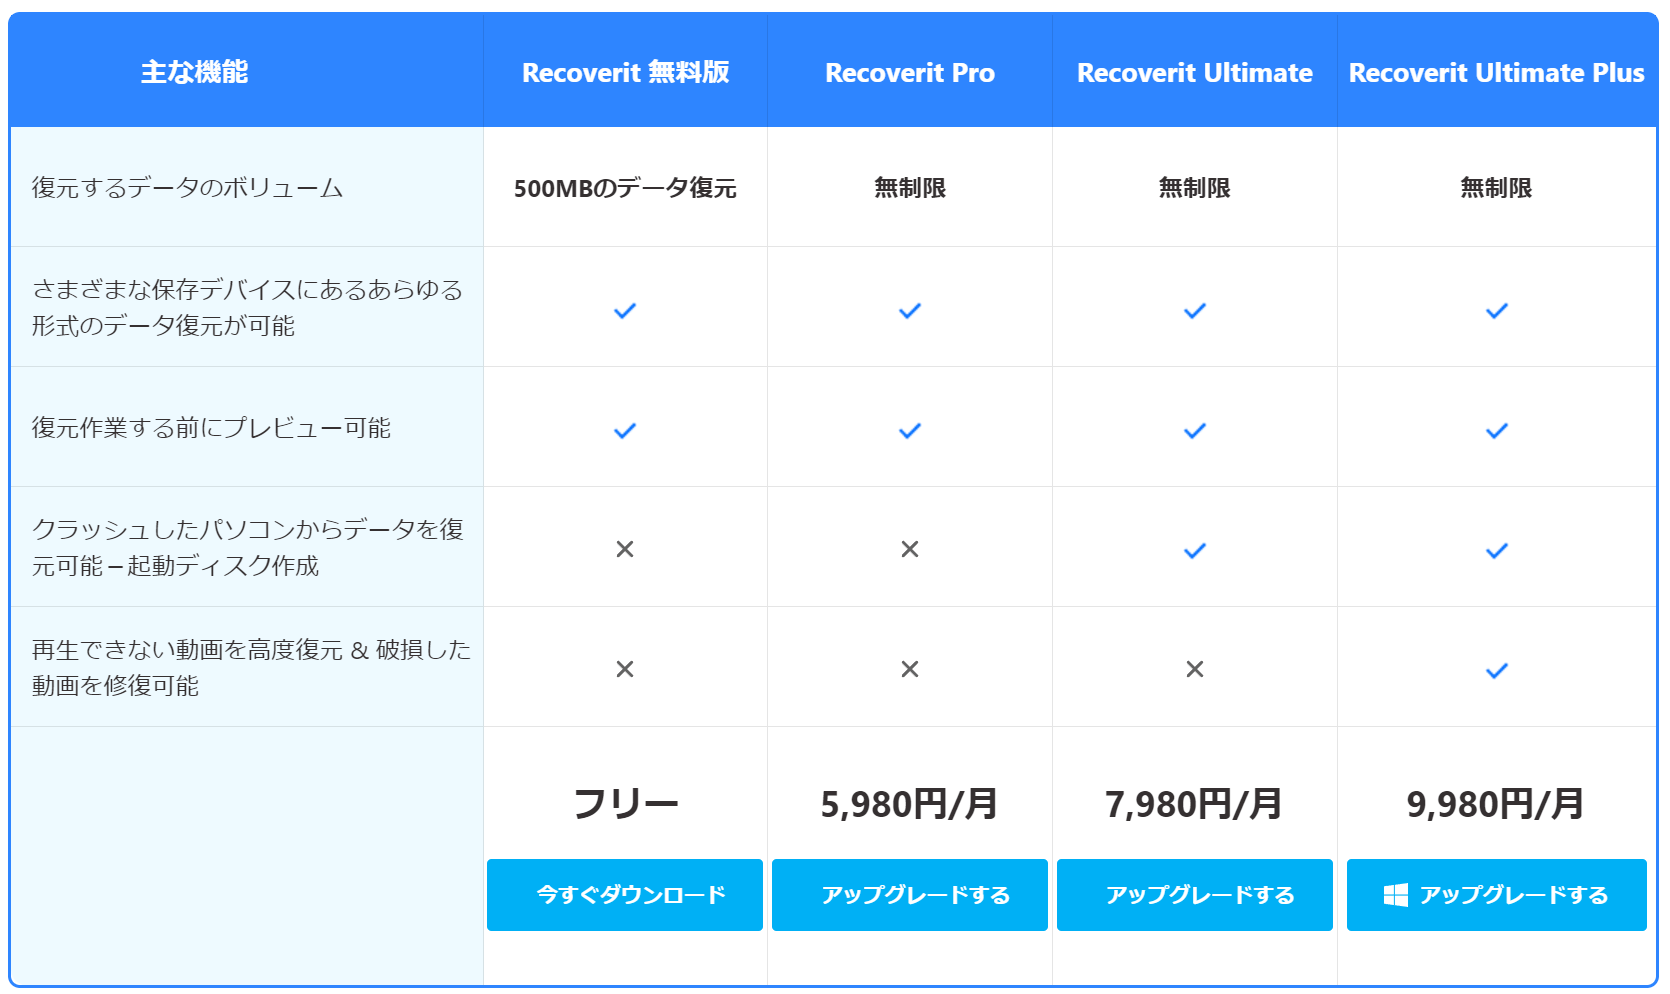 Recoveritの料金プラン